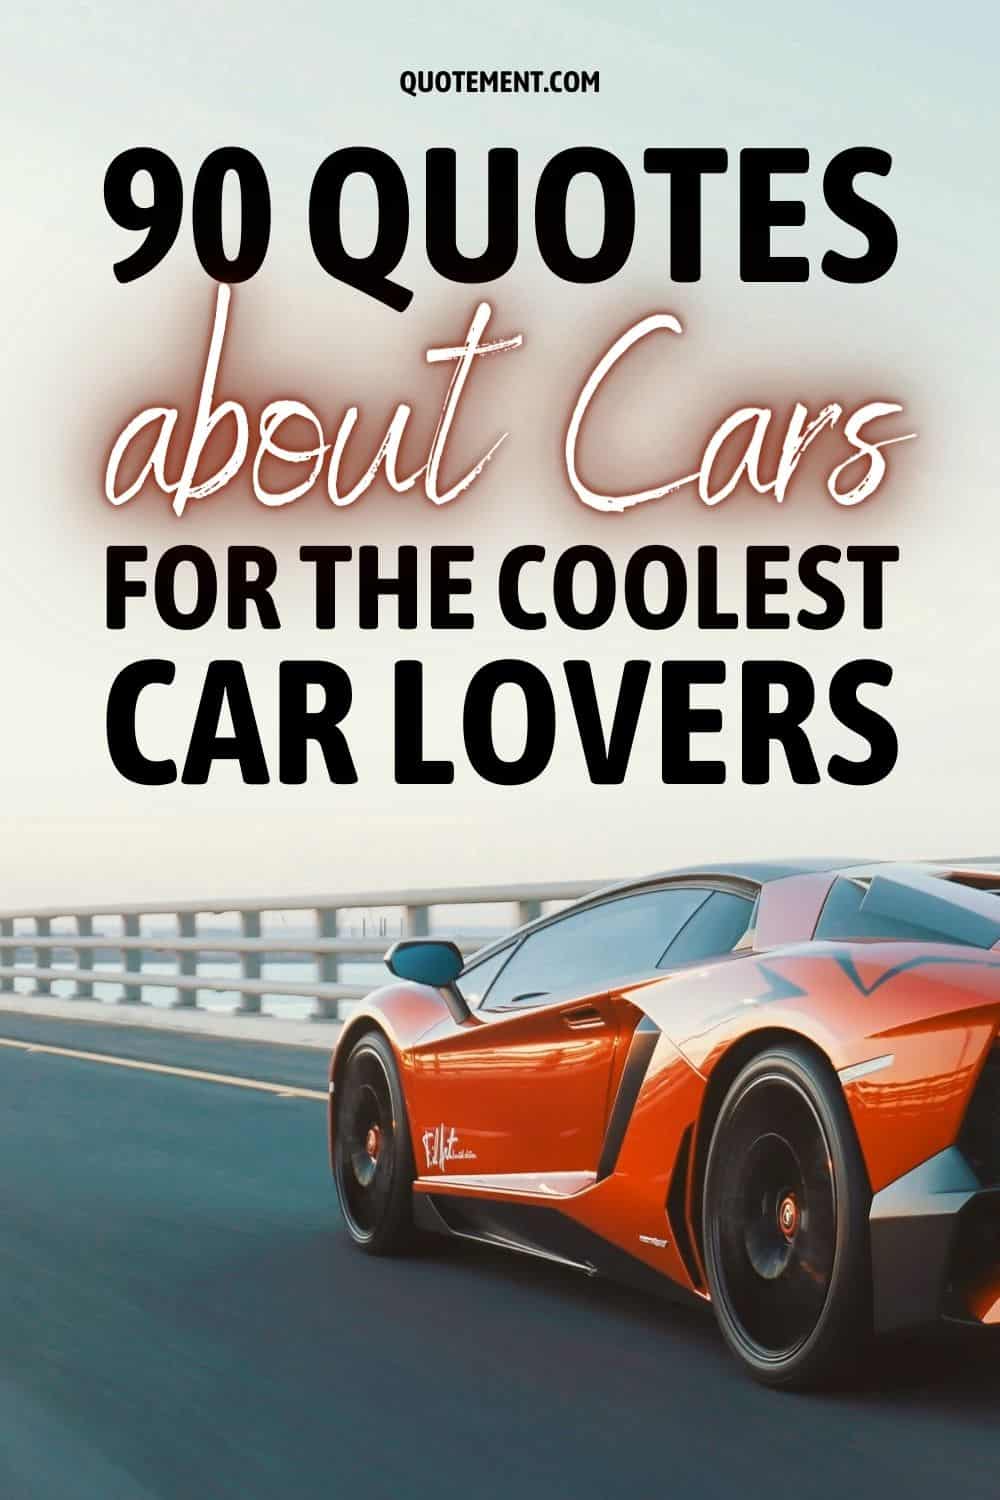 90 Quotes About Cars For The Coolest Car Lovers